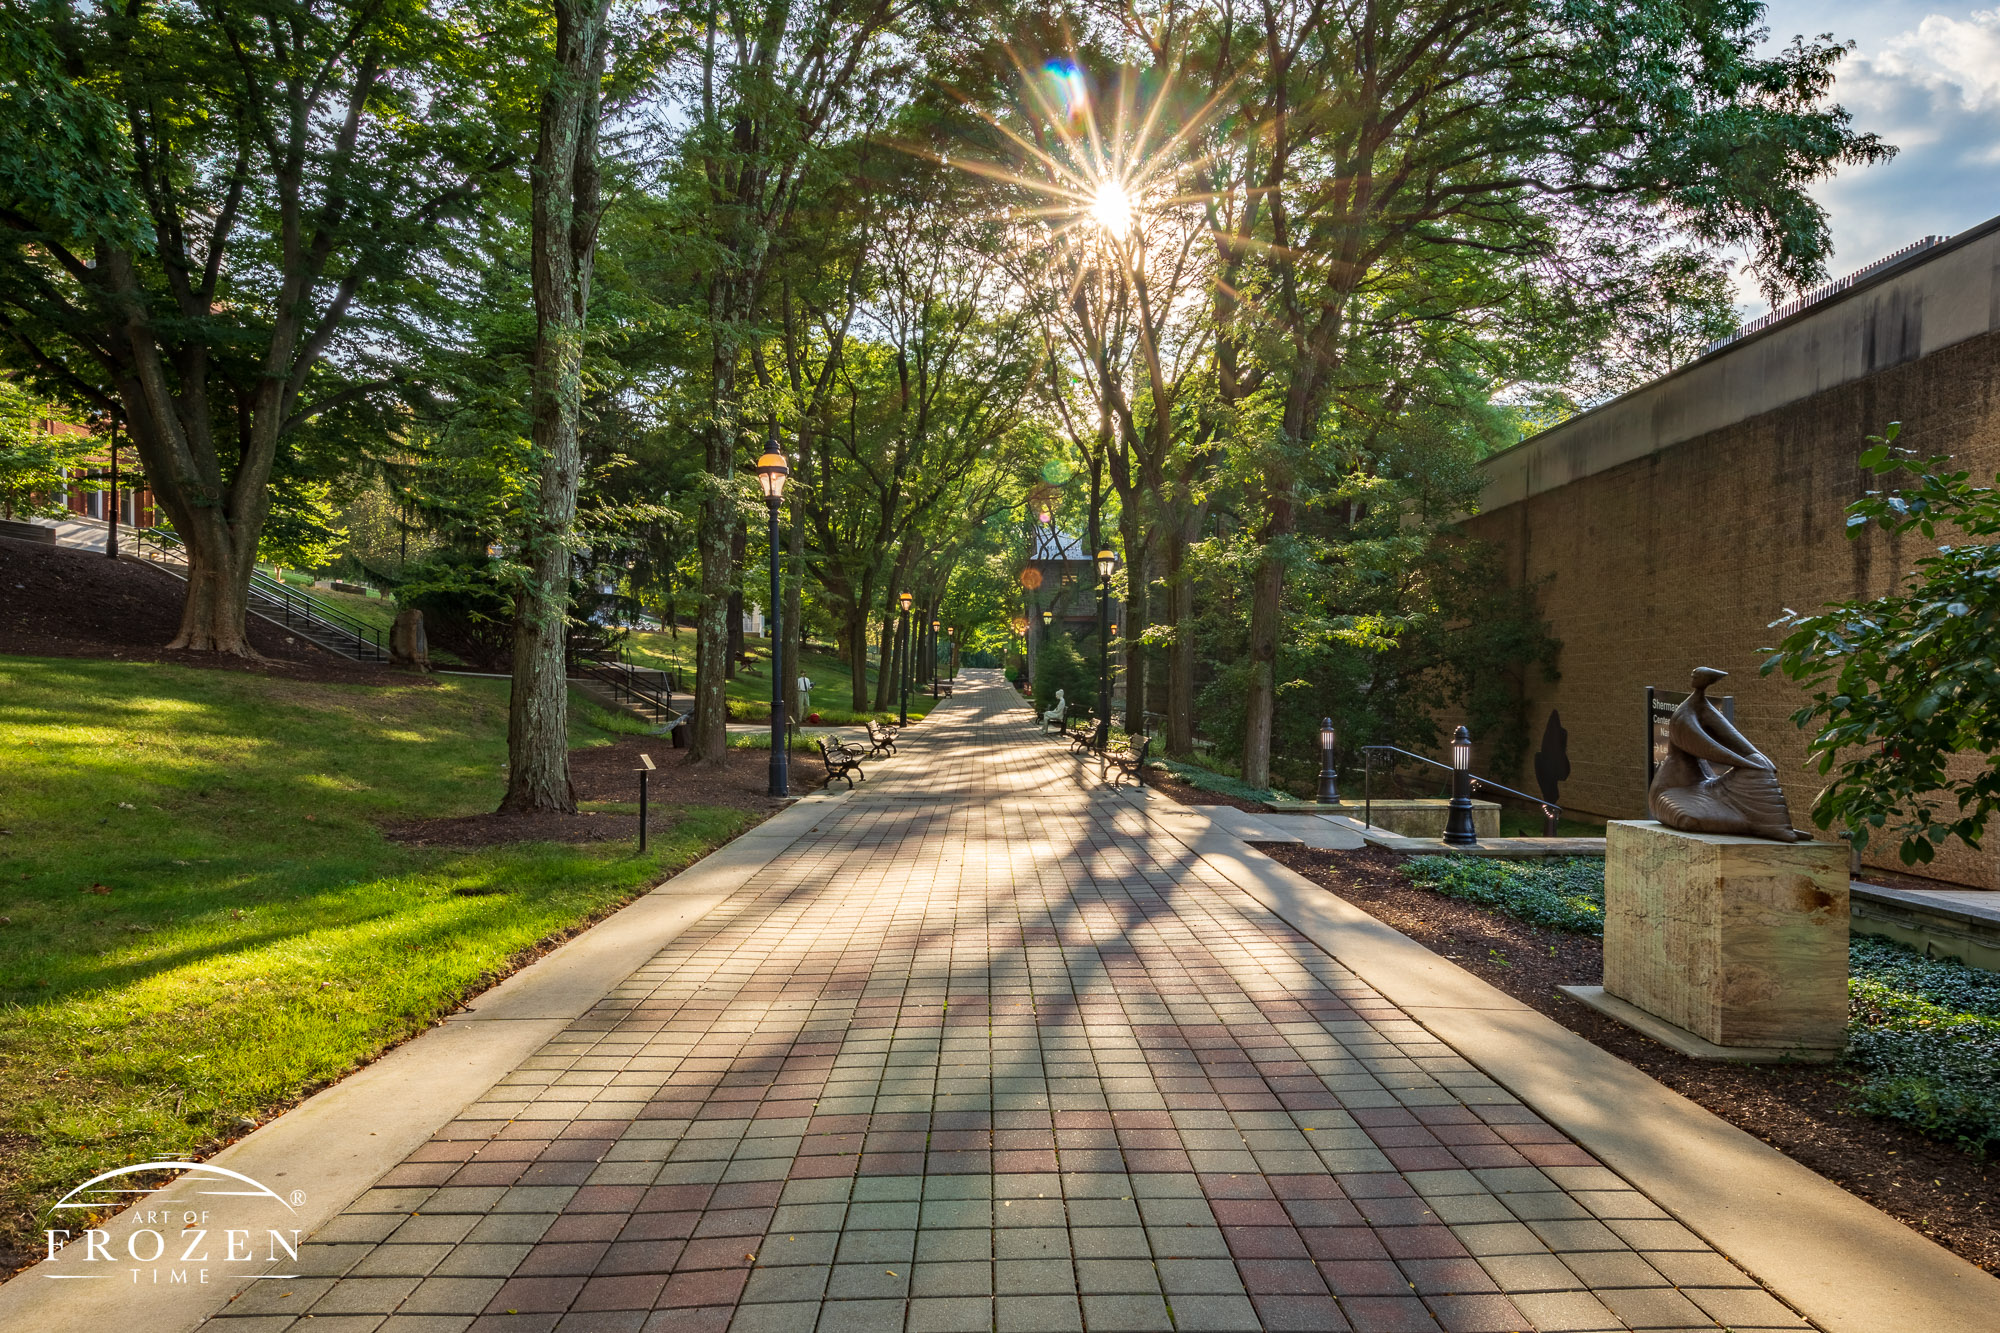 Memorial Walk on Lehigh University is a wide pedestrian avenue lined sculptures and trees which on this evening gently filtered the golden sunlight